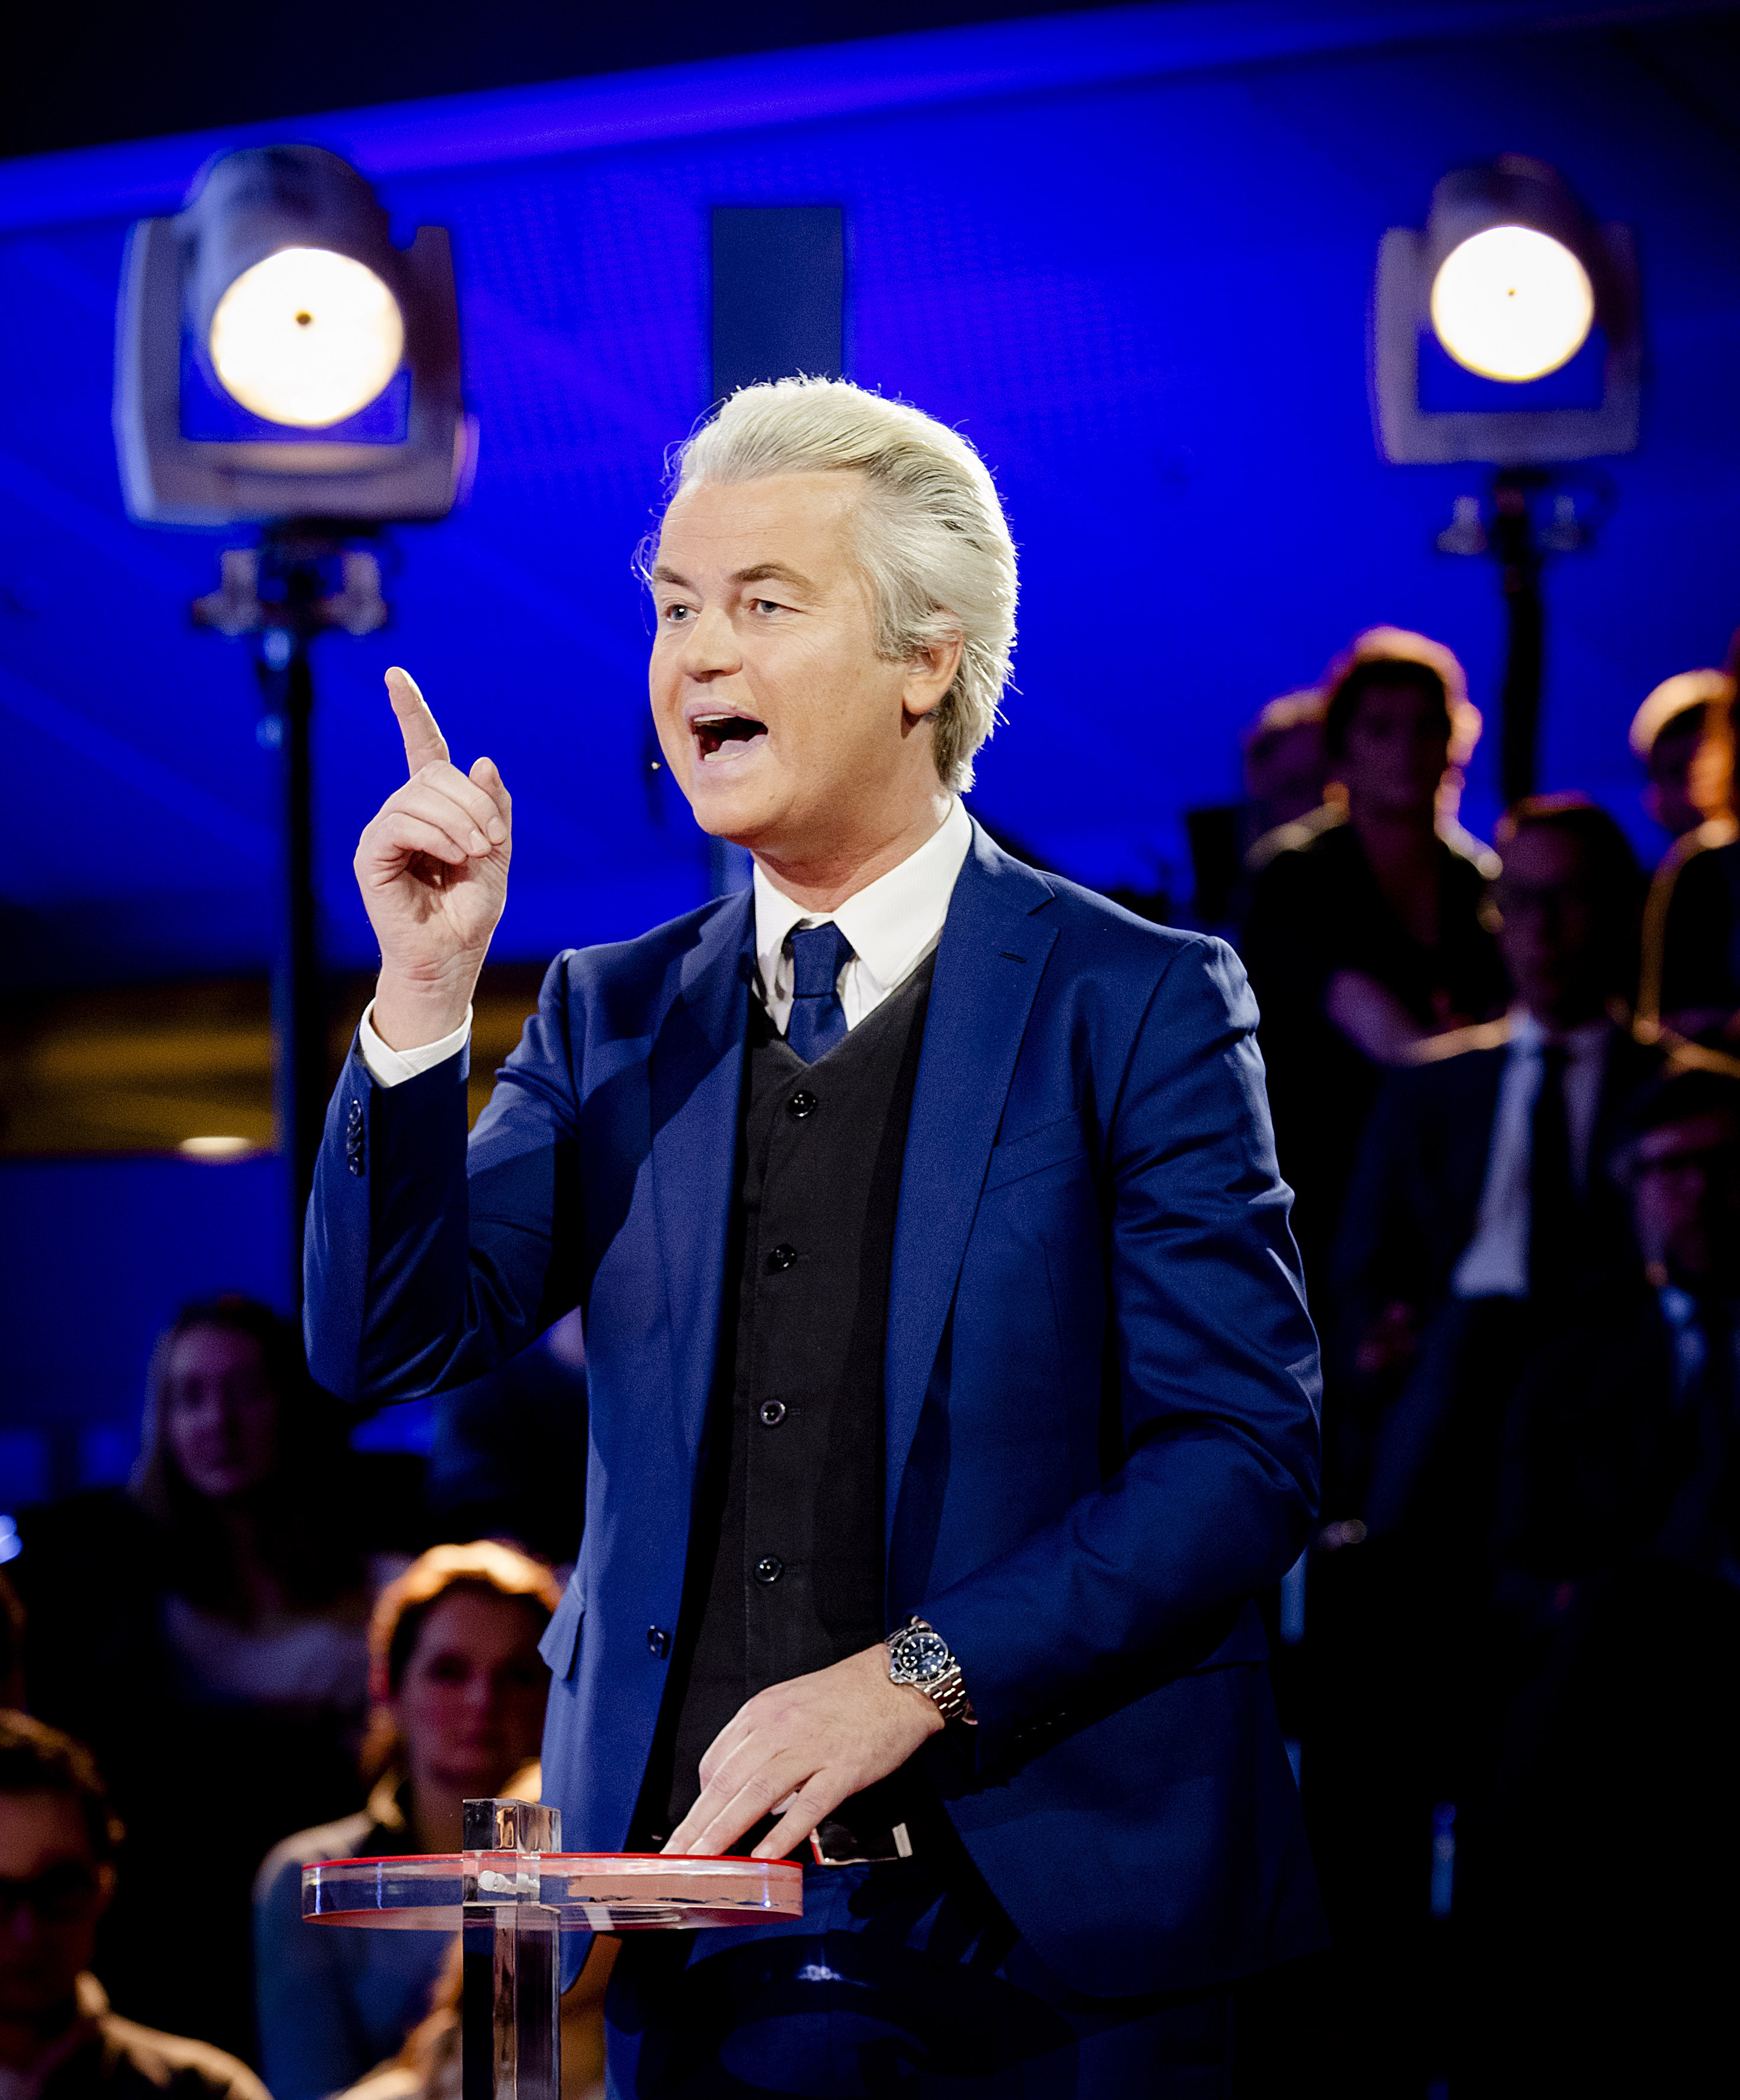 PVV party leader and firebrand anti-Islam lawmaker Geert Wilders gestures during the closing debate at parliament in The Hague, Netherlands, Tuesday, March 14, 2017. Amid unprecedented international attention, the Dutch go to the polls Wednesday in a parliamentary election that is seen as a bellwether for the future of populism in a year of crucial votes in Europe. (Robin van Lonkhuijsen ANP POOL via AP)